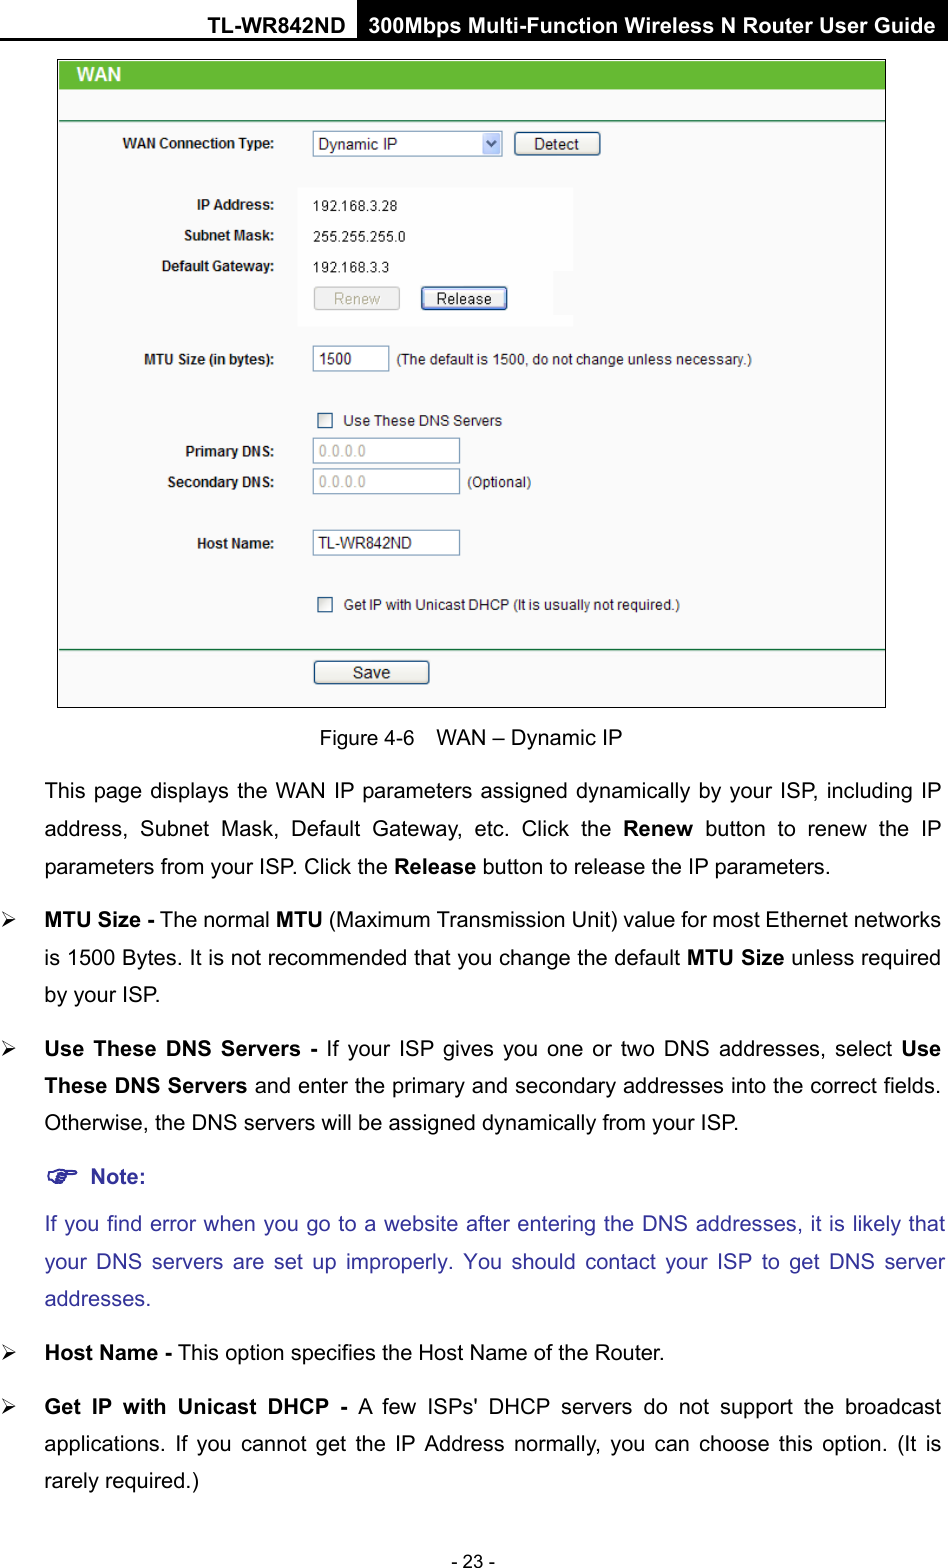 TL-WR842ND 300Mbps Multi-Function Wireless N Router User Guide  - 23 -  Figure 4-6  WAN – Dynamic IP This page displays the WAN IP parameters assigned dynamically by your ISP, including IP address, Subnet Mask, Default Gateway, etc. Click the Renew button to renew the IP parameters from your ISP. Click the Release button to release the IP parameters.  MTU Size - The normal MTU (Maximum Transmission Unit) value for most Ethernet networks is 1500 Bytes. It is not recommended that you change the default MTU Size unless required by your ISP.    Use These DNS Servers -  If your ISP gives you one or two DNS addresses, select Use These DNS Servers and enter the primary and secondary addresses into the correct fields. Otherwise, the DNS servers will be assigned dynamically from your ISP.    Note: If you find error when you go to a website after entering the DNS addresses, it is likely that your DNS servers are set up improperly. You should contact your ISP to get DNS server addresses.    Host Name - This option specifies the Host Name of the Router.  Get IP with Unicast DHCP - A few ISPs&apos; DHCP servers do not support the broadcast applications. If you cannot get the IP Address normally, you can choose this option.  (It is rarely required.) 